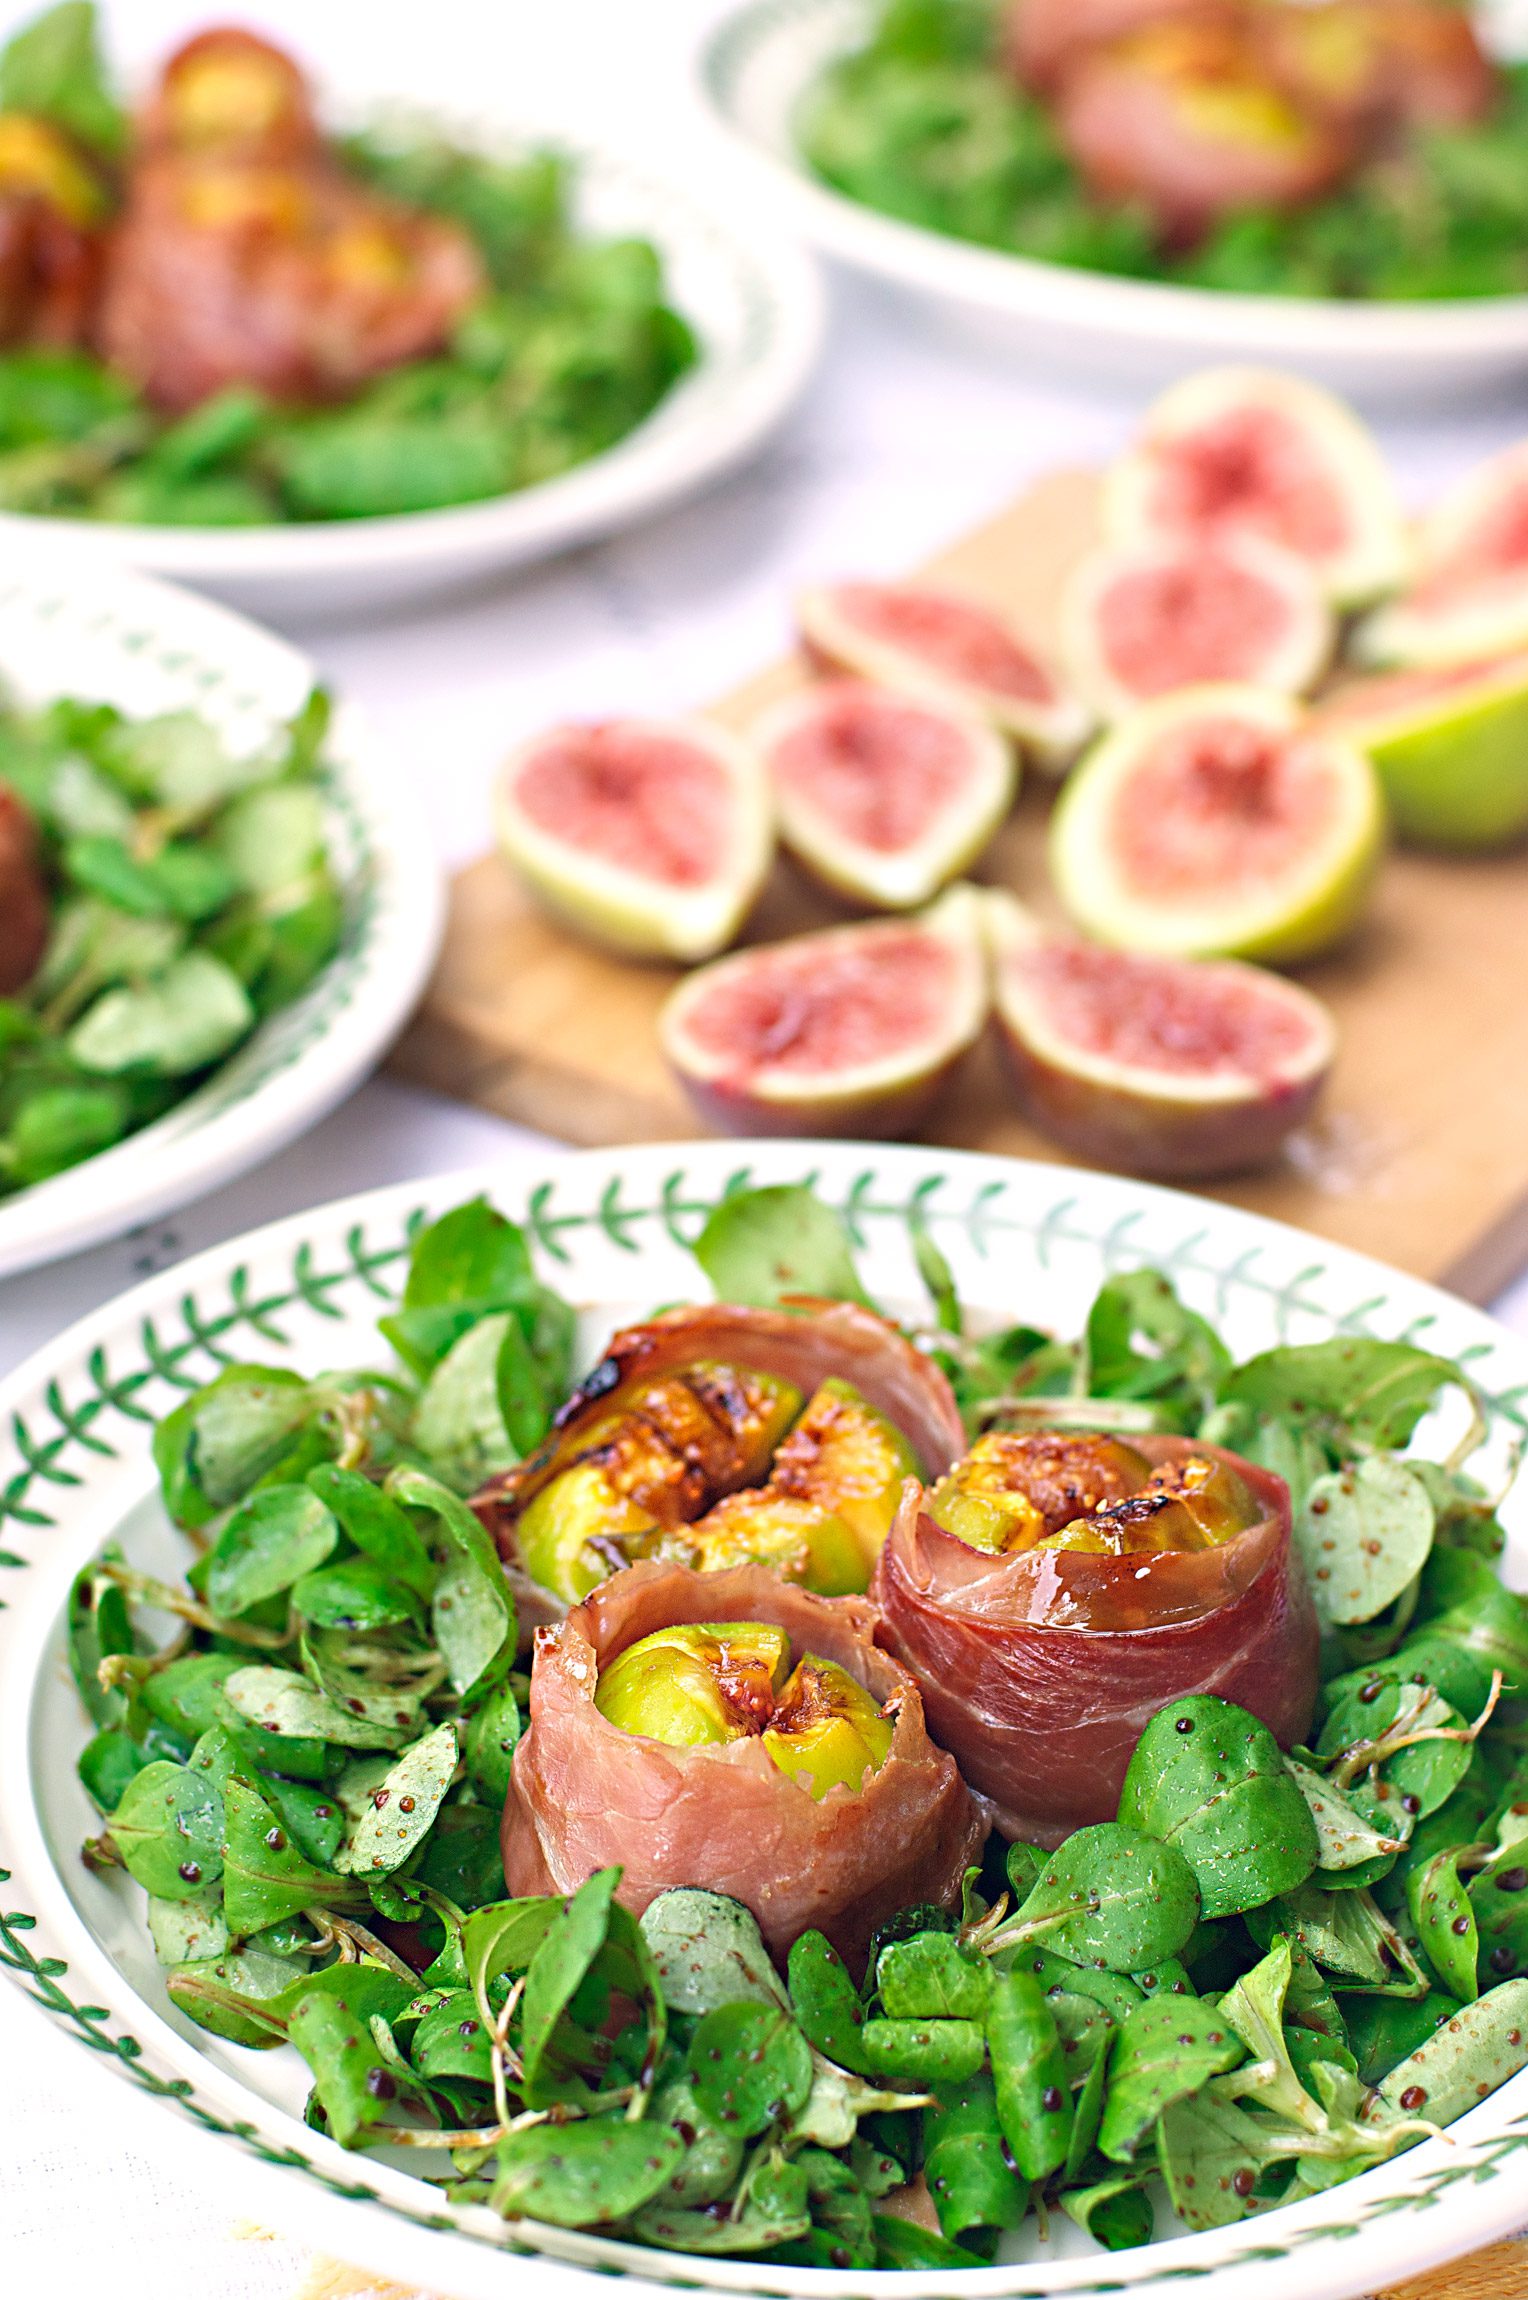 Grilled-figs-with-Speck-recipe-photography-and-styling-by-Monica-Schwartz